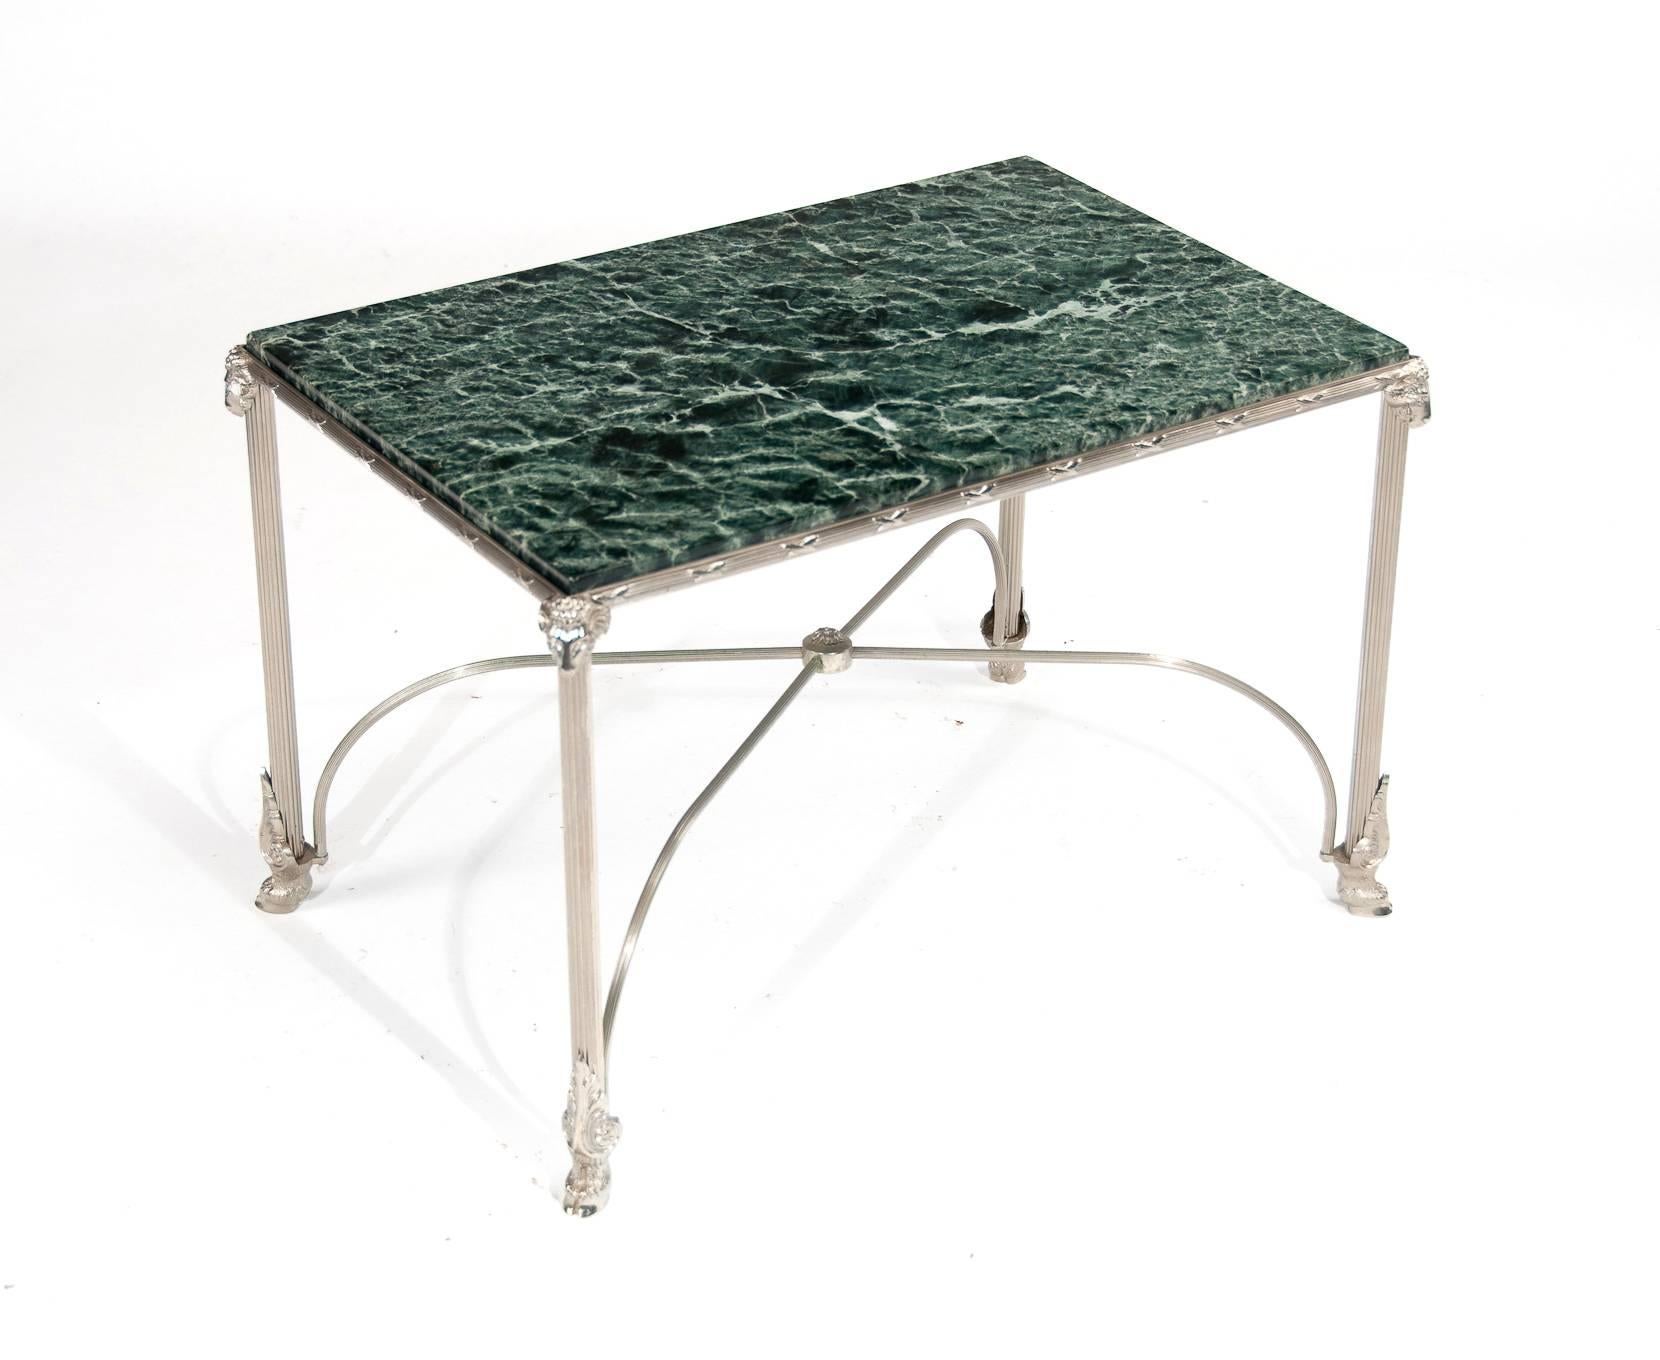 English Nickel-Plated Marble-Topped Occasional Table